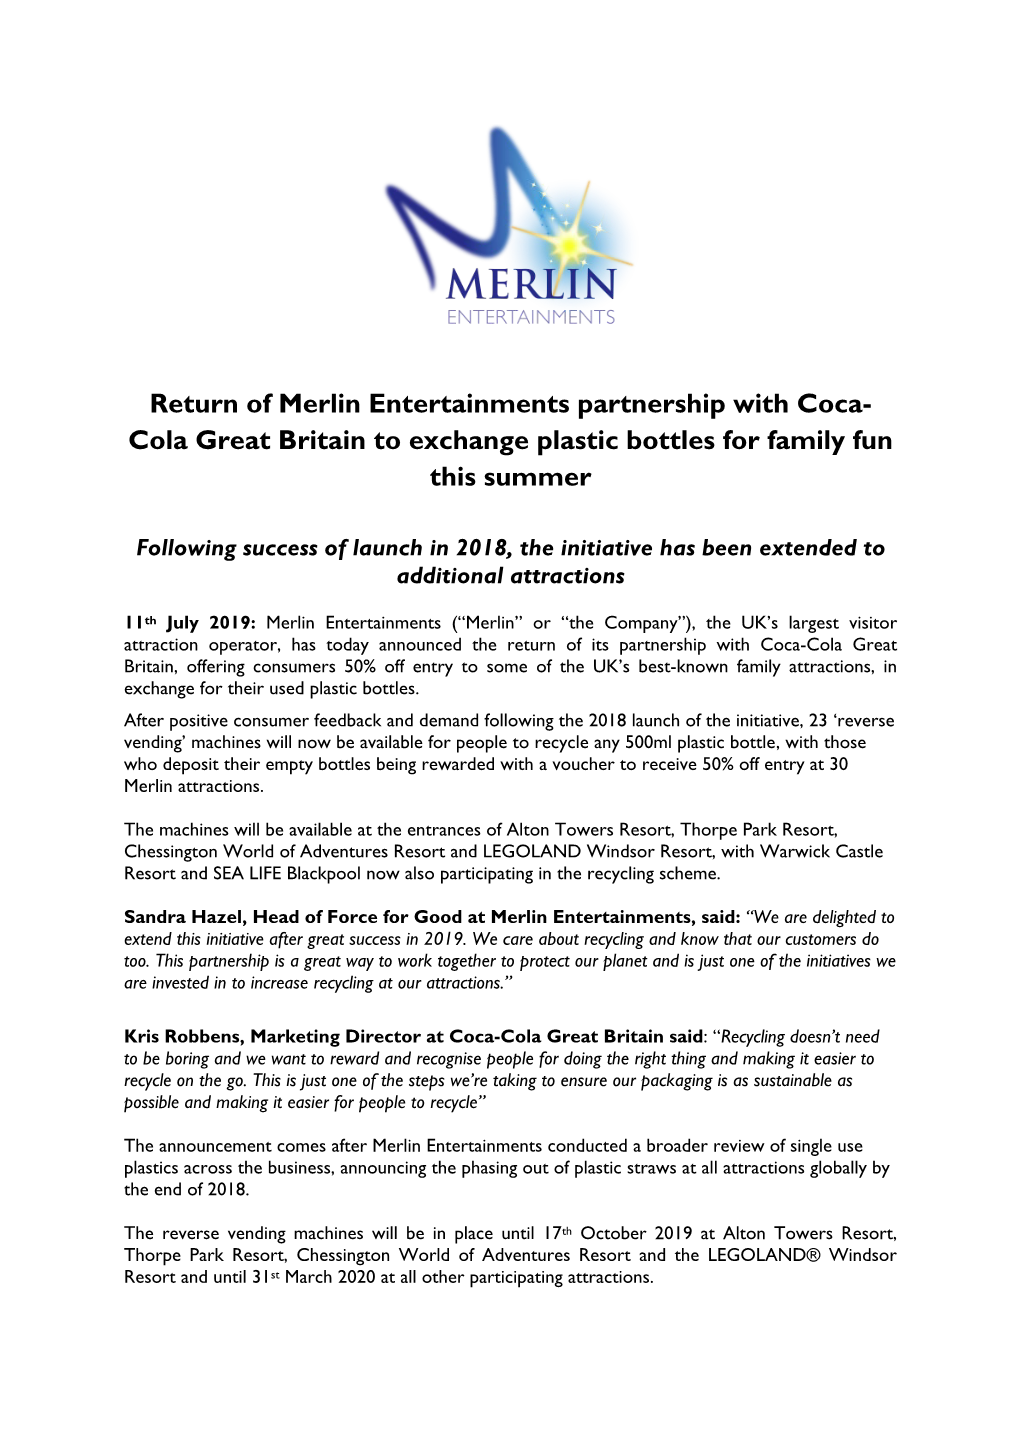 Return of Merlin Entertainments Partnership with Coca- Cola Great Britain to Exchange Plastic Bottles for Family Fun This Summer